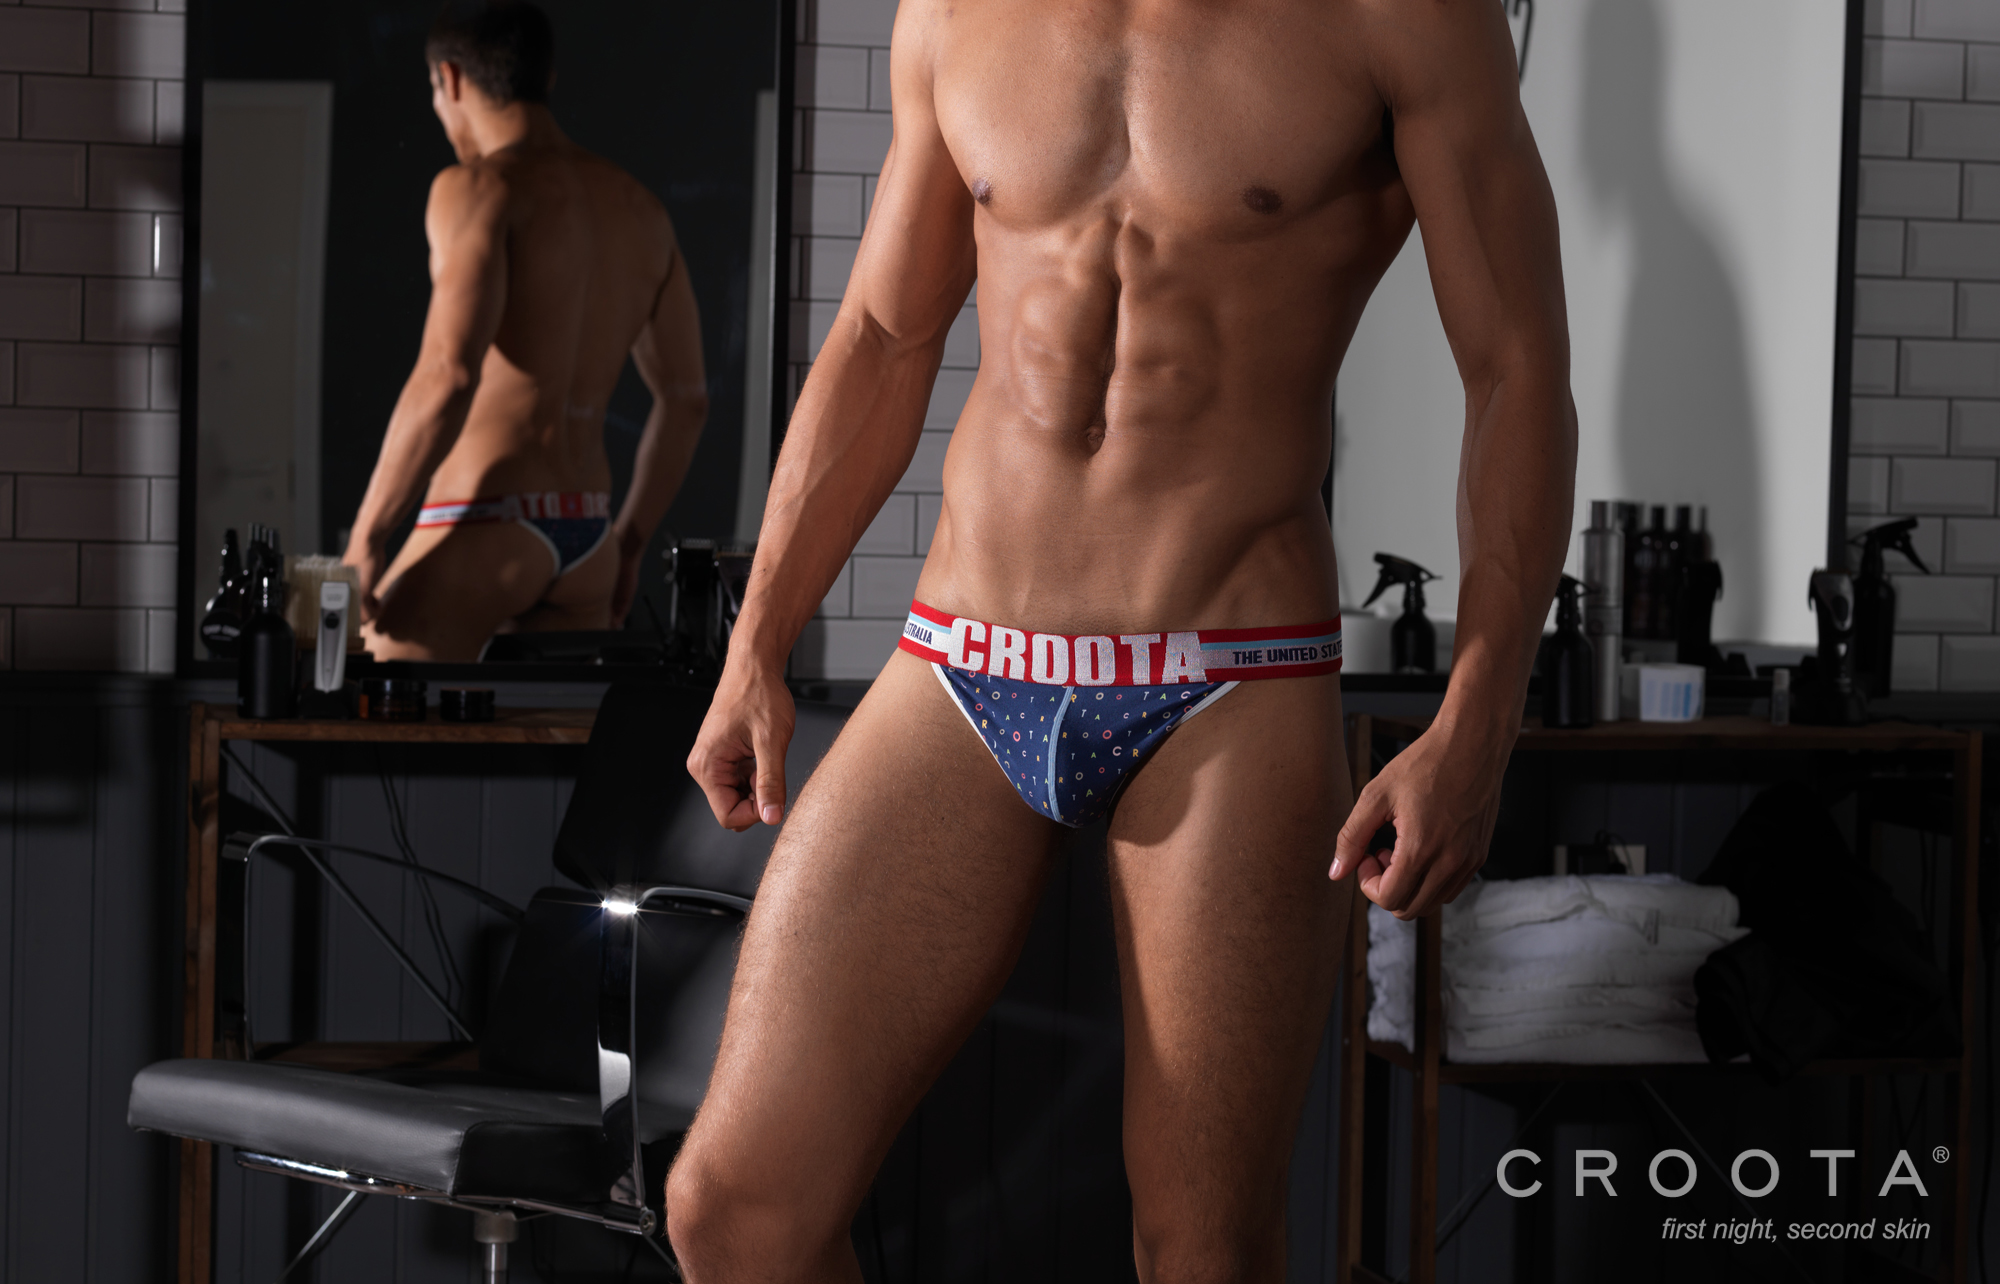 Croota Underwear Launches New Thongs “45 Degree” And “Croota Endless” In Rollout Of Brand New Ranges